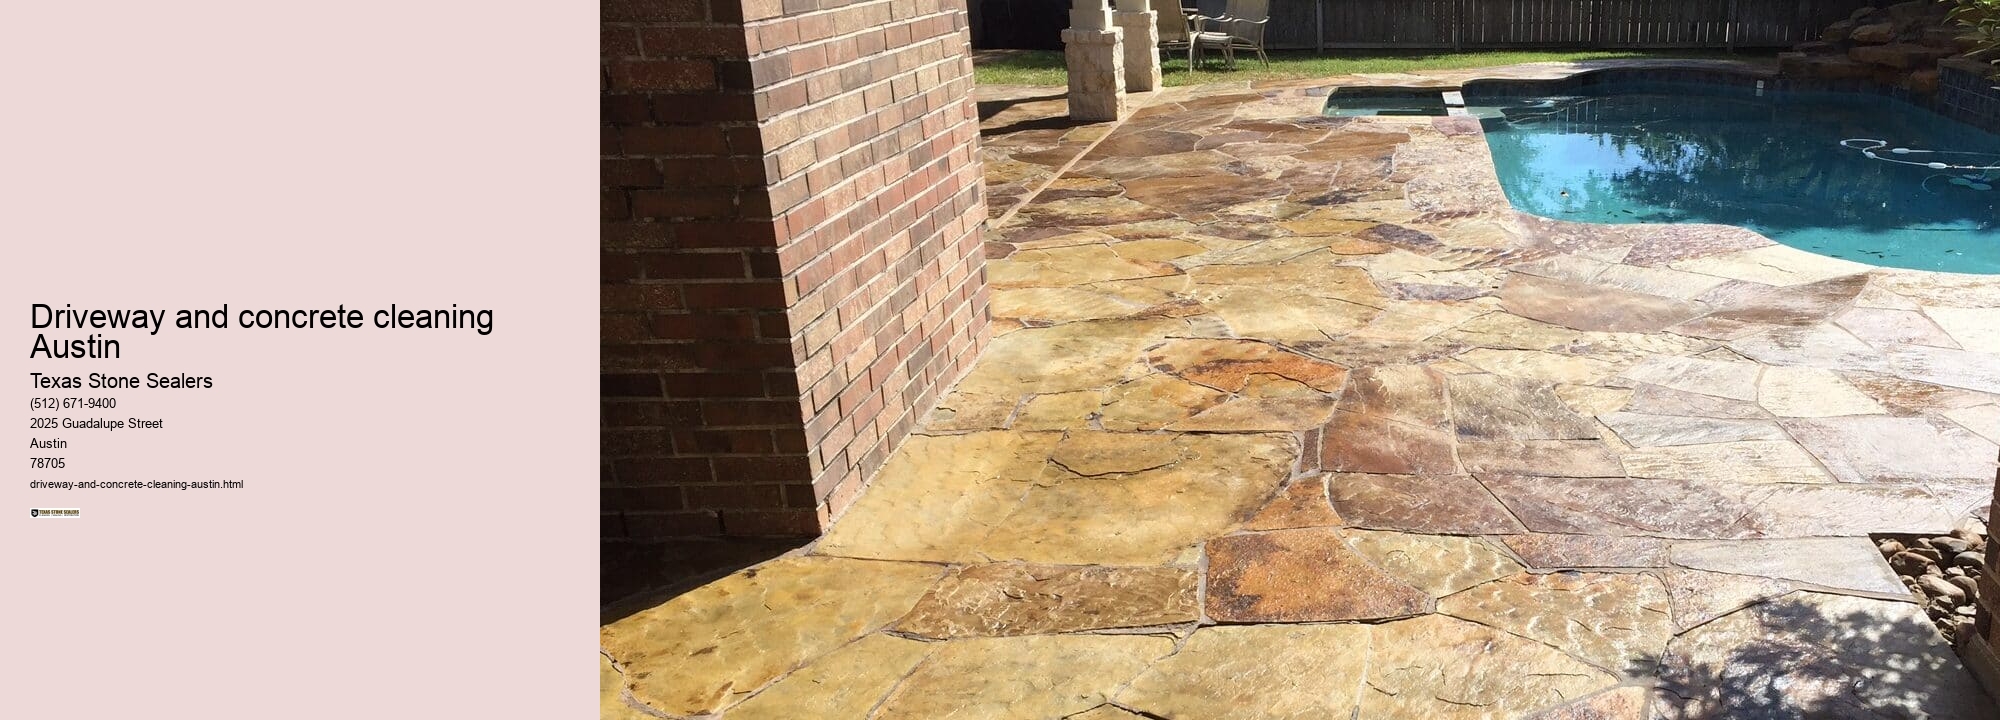 Driveway and concrete cleaning Austin